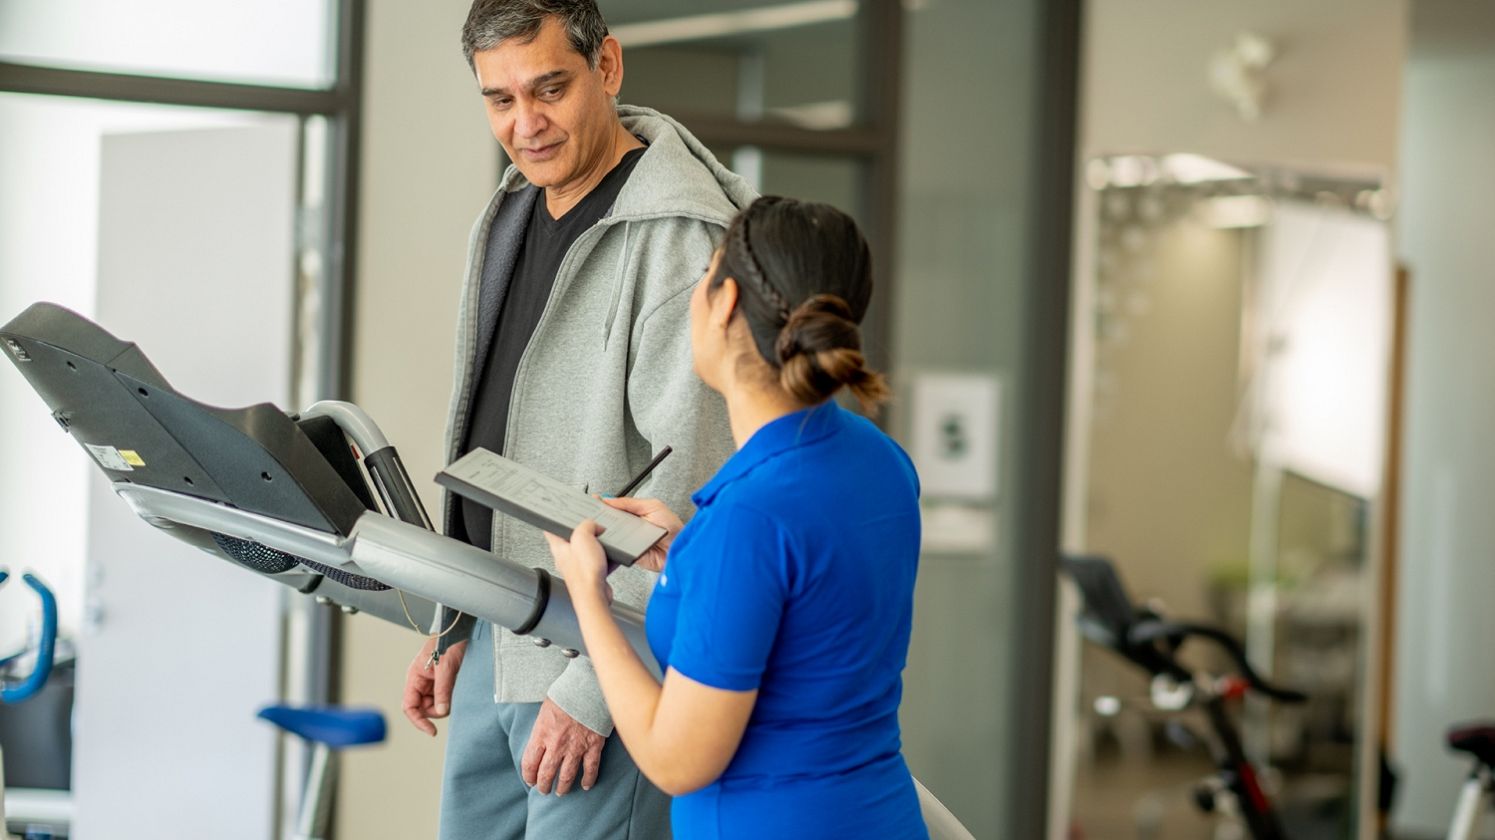 The Role of Physiotherapy in Cardiac Rehabilitation